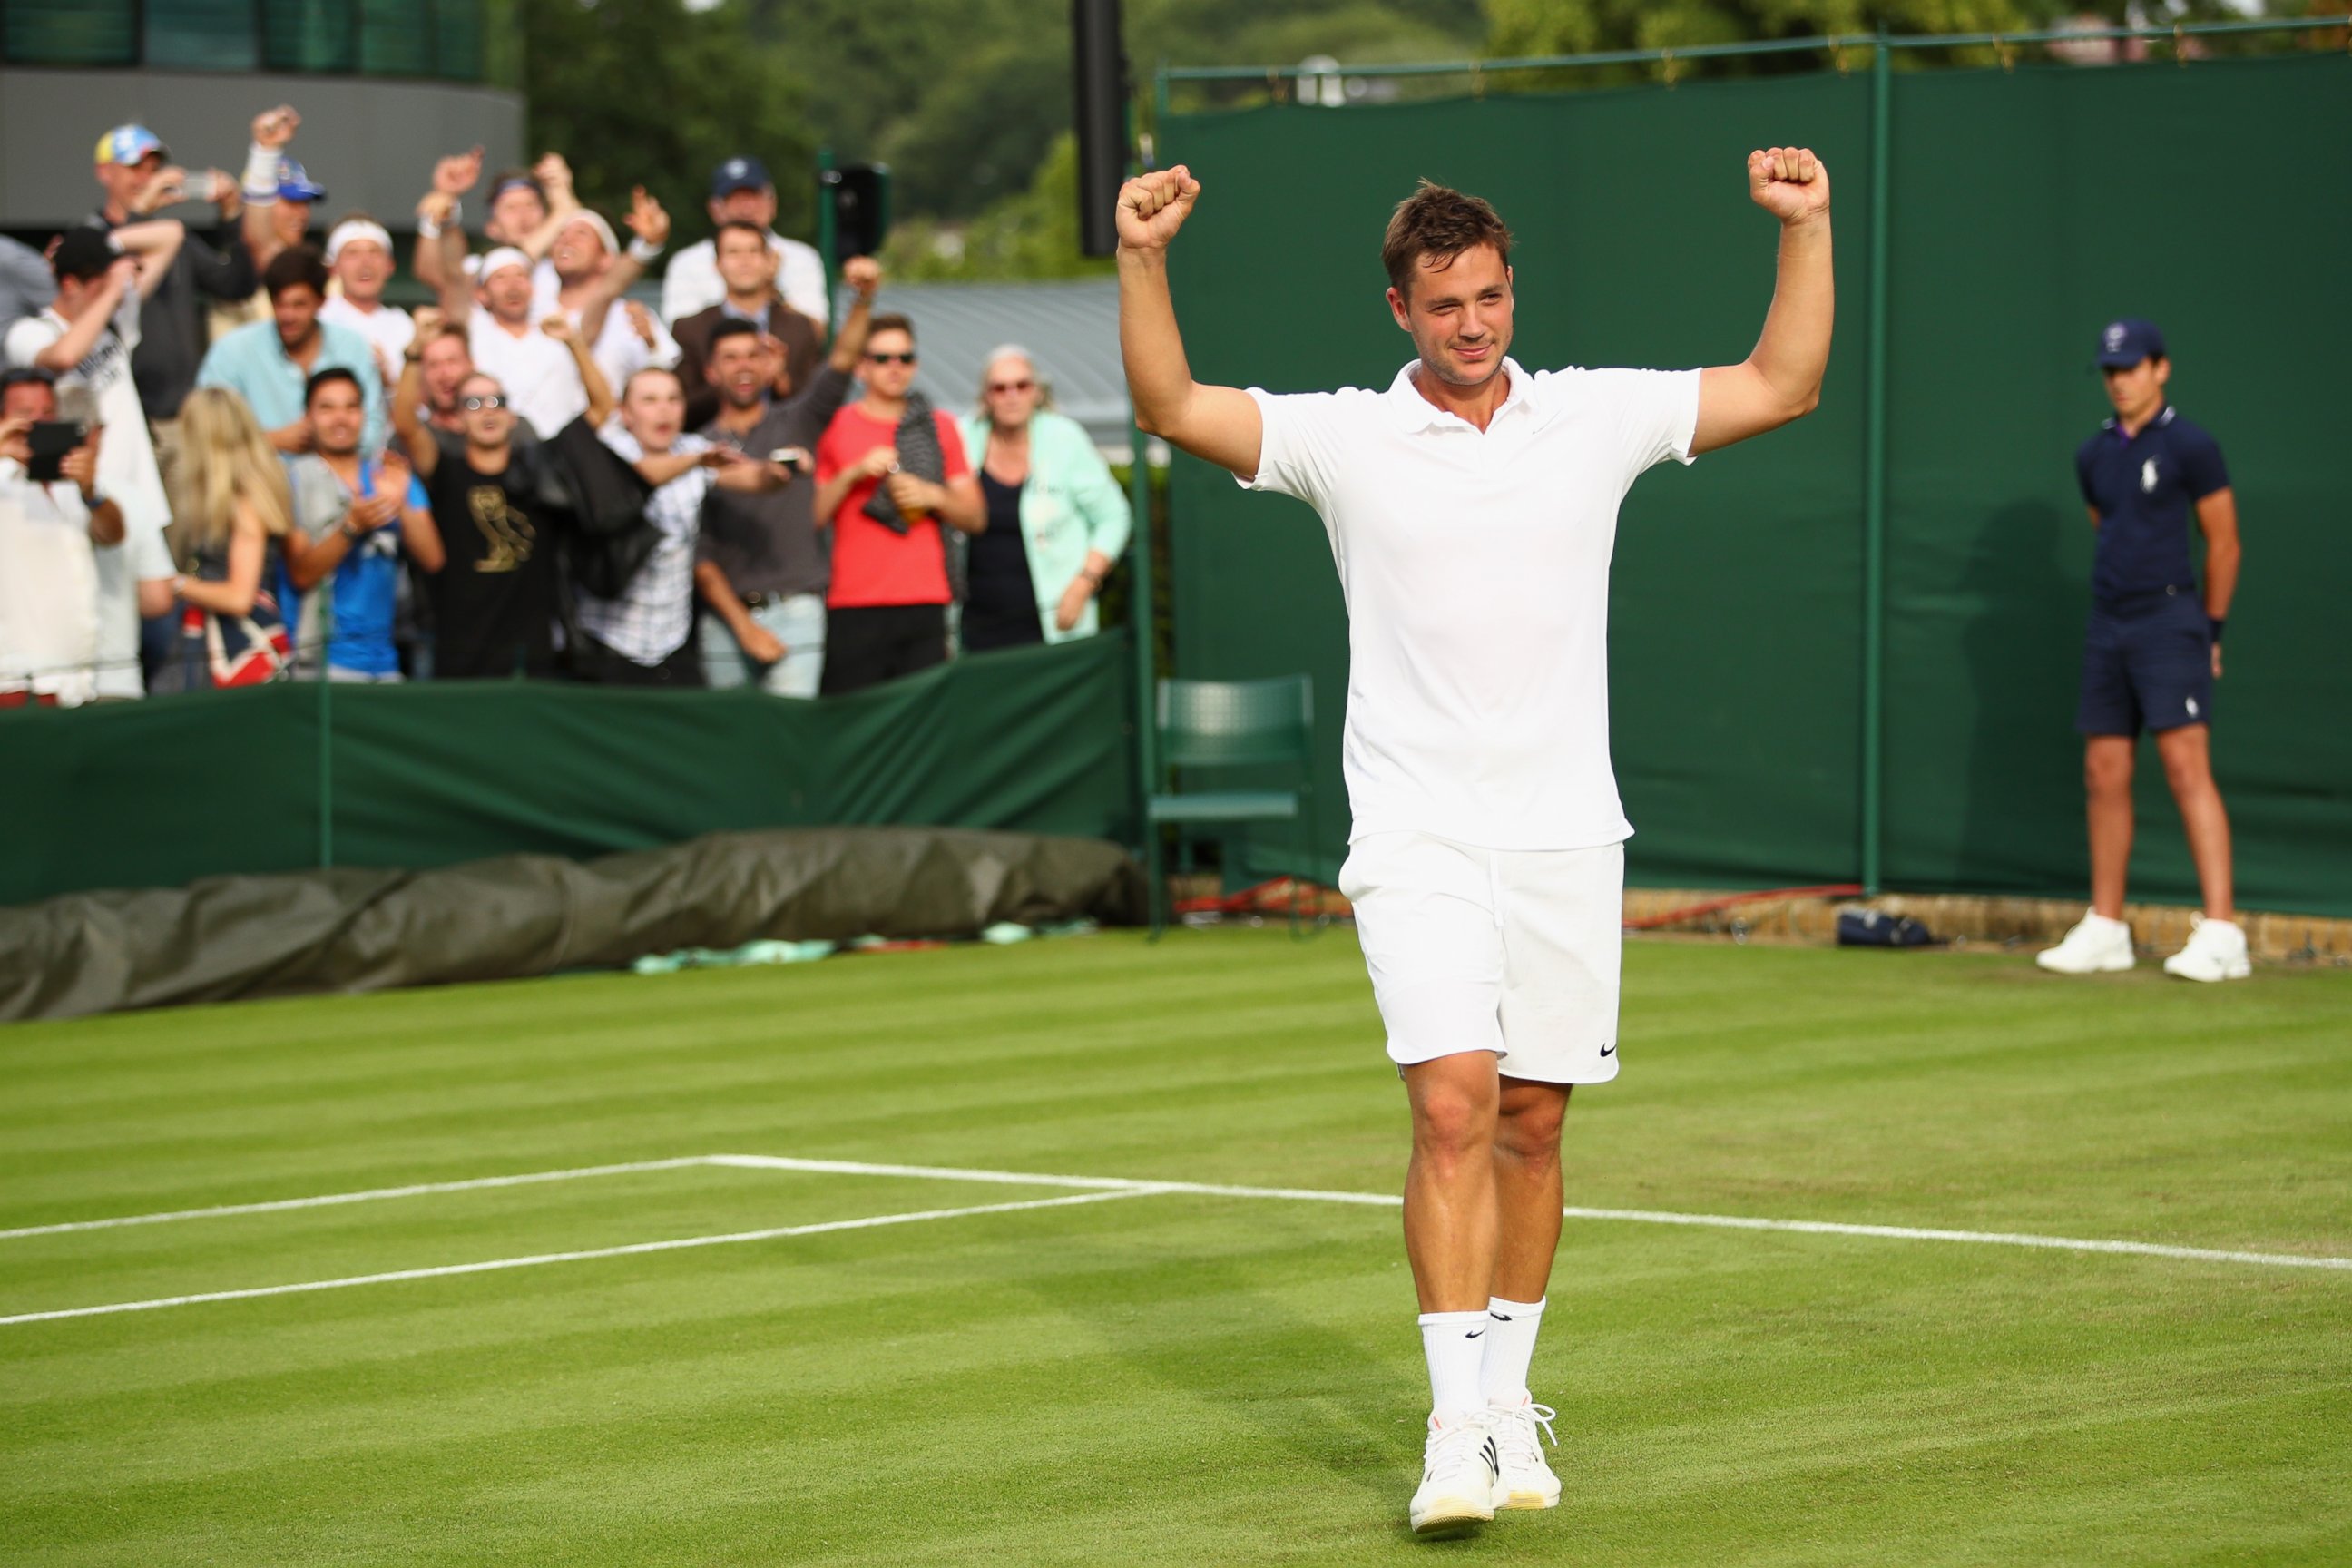 PHOTO: Marcus Willis celebrates upset victory during the Men's Singles first round match against Ricardas Berankis at Wimbledon on June 27, 2016 in London.